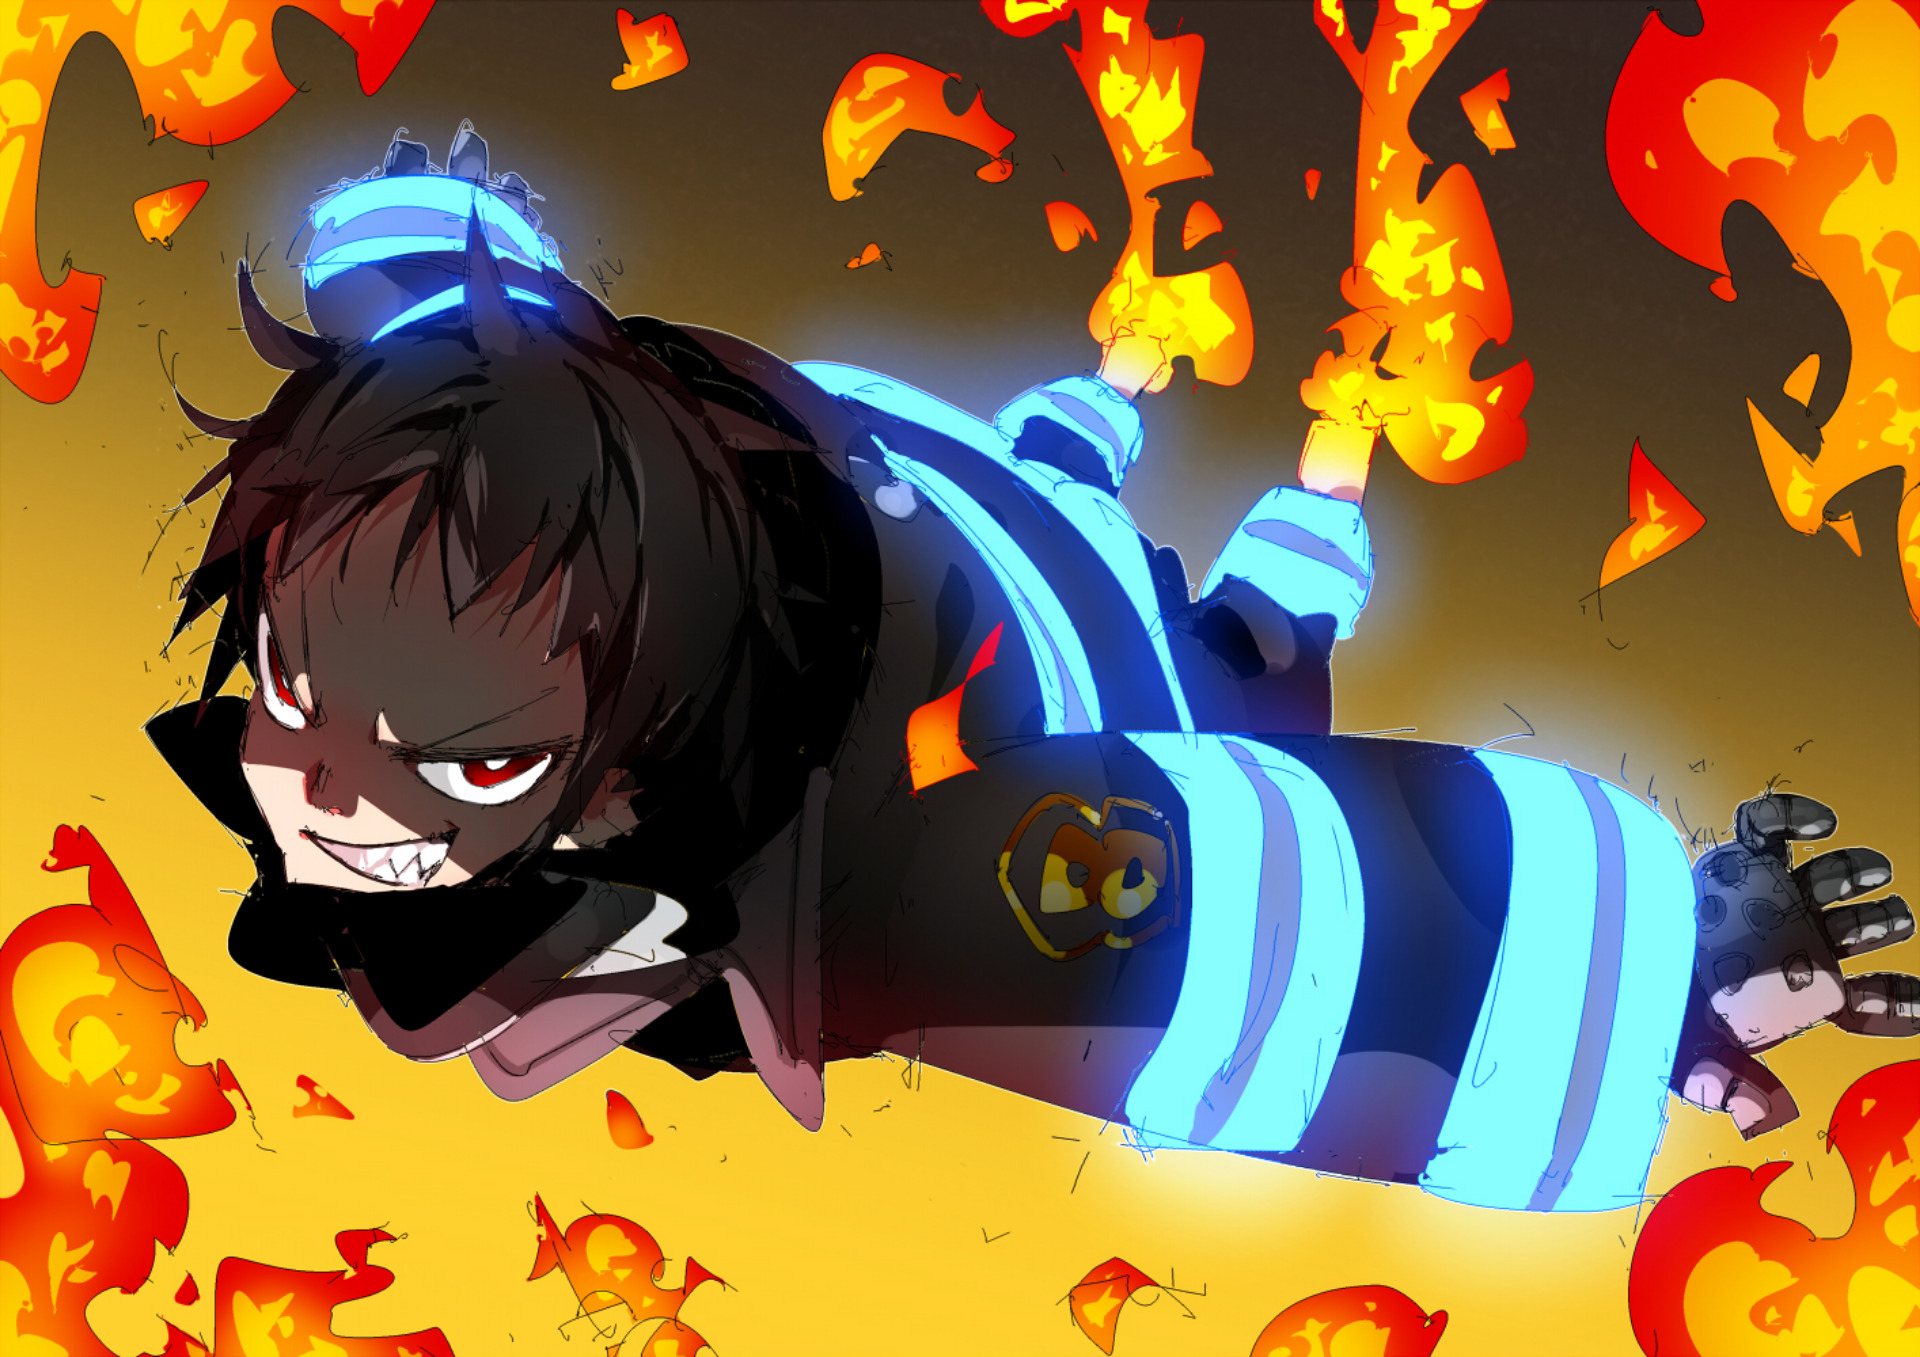 Demon Slayer's Tanjiro and Fire Force's Shinra Had Personal Shonen Quests